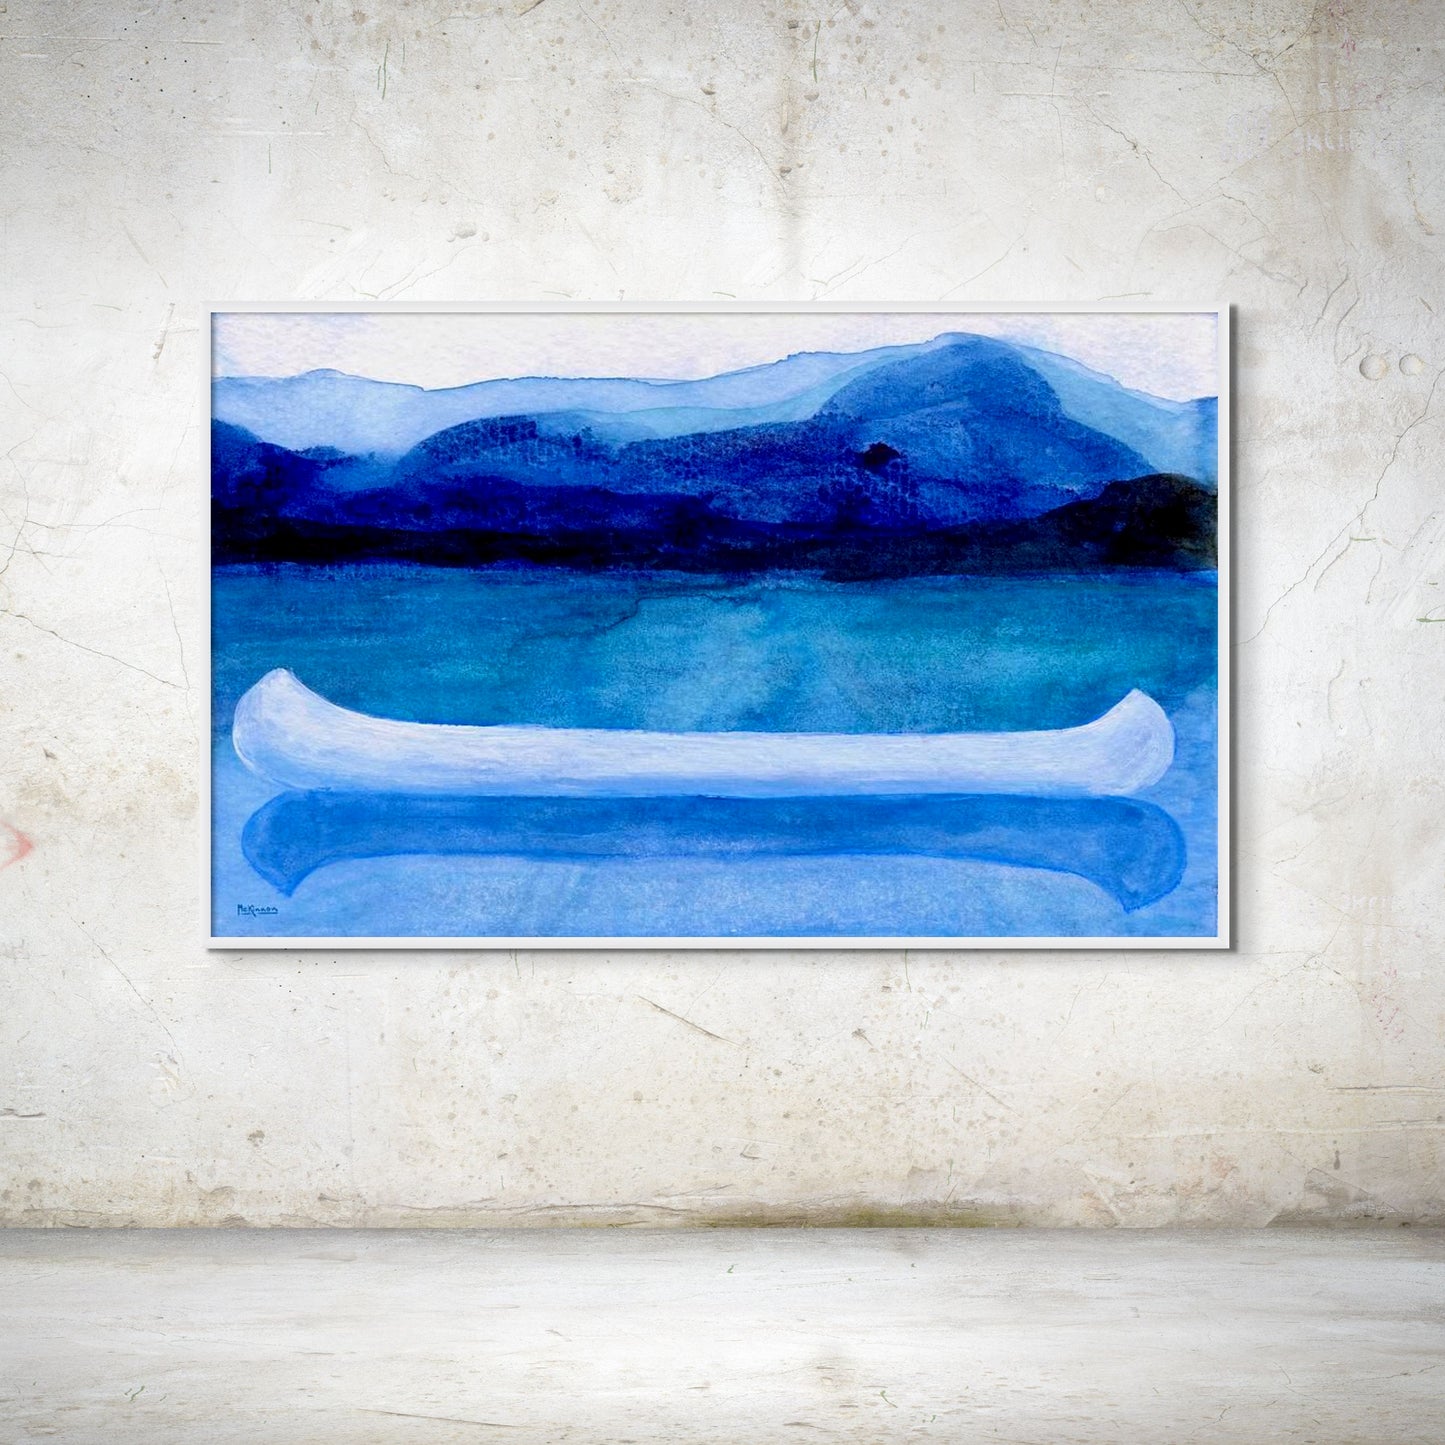 A work of canoeing art by Canadian artist Catherine McKinnon. The watercolor depicts a small white boat, a "canoe", on blue water with a dark blue distant shore and lighter blue distant moutains. The giclee print is framed in white and is mounted on a grey, textured wall.